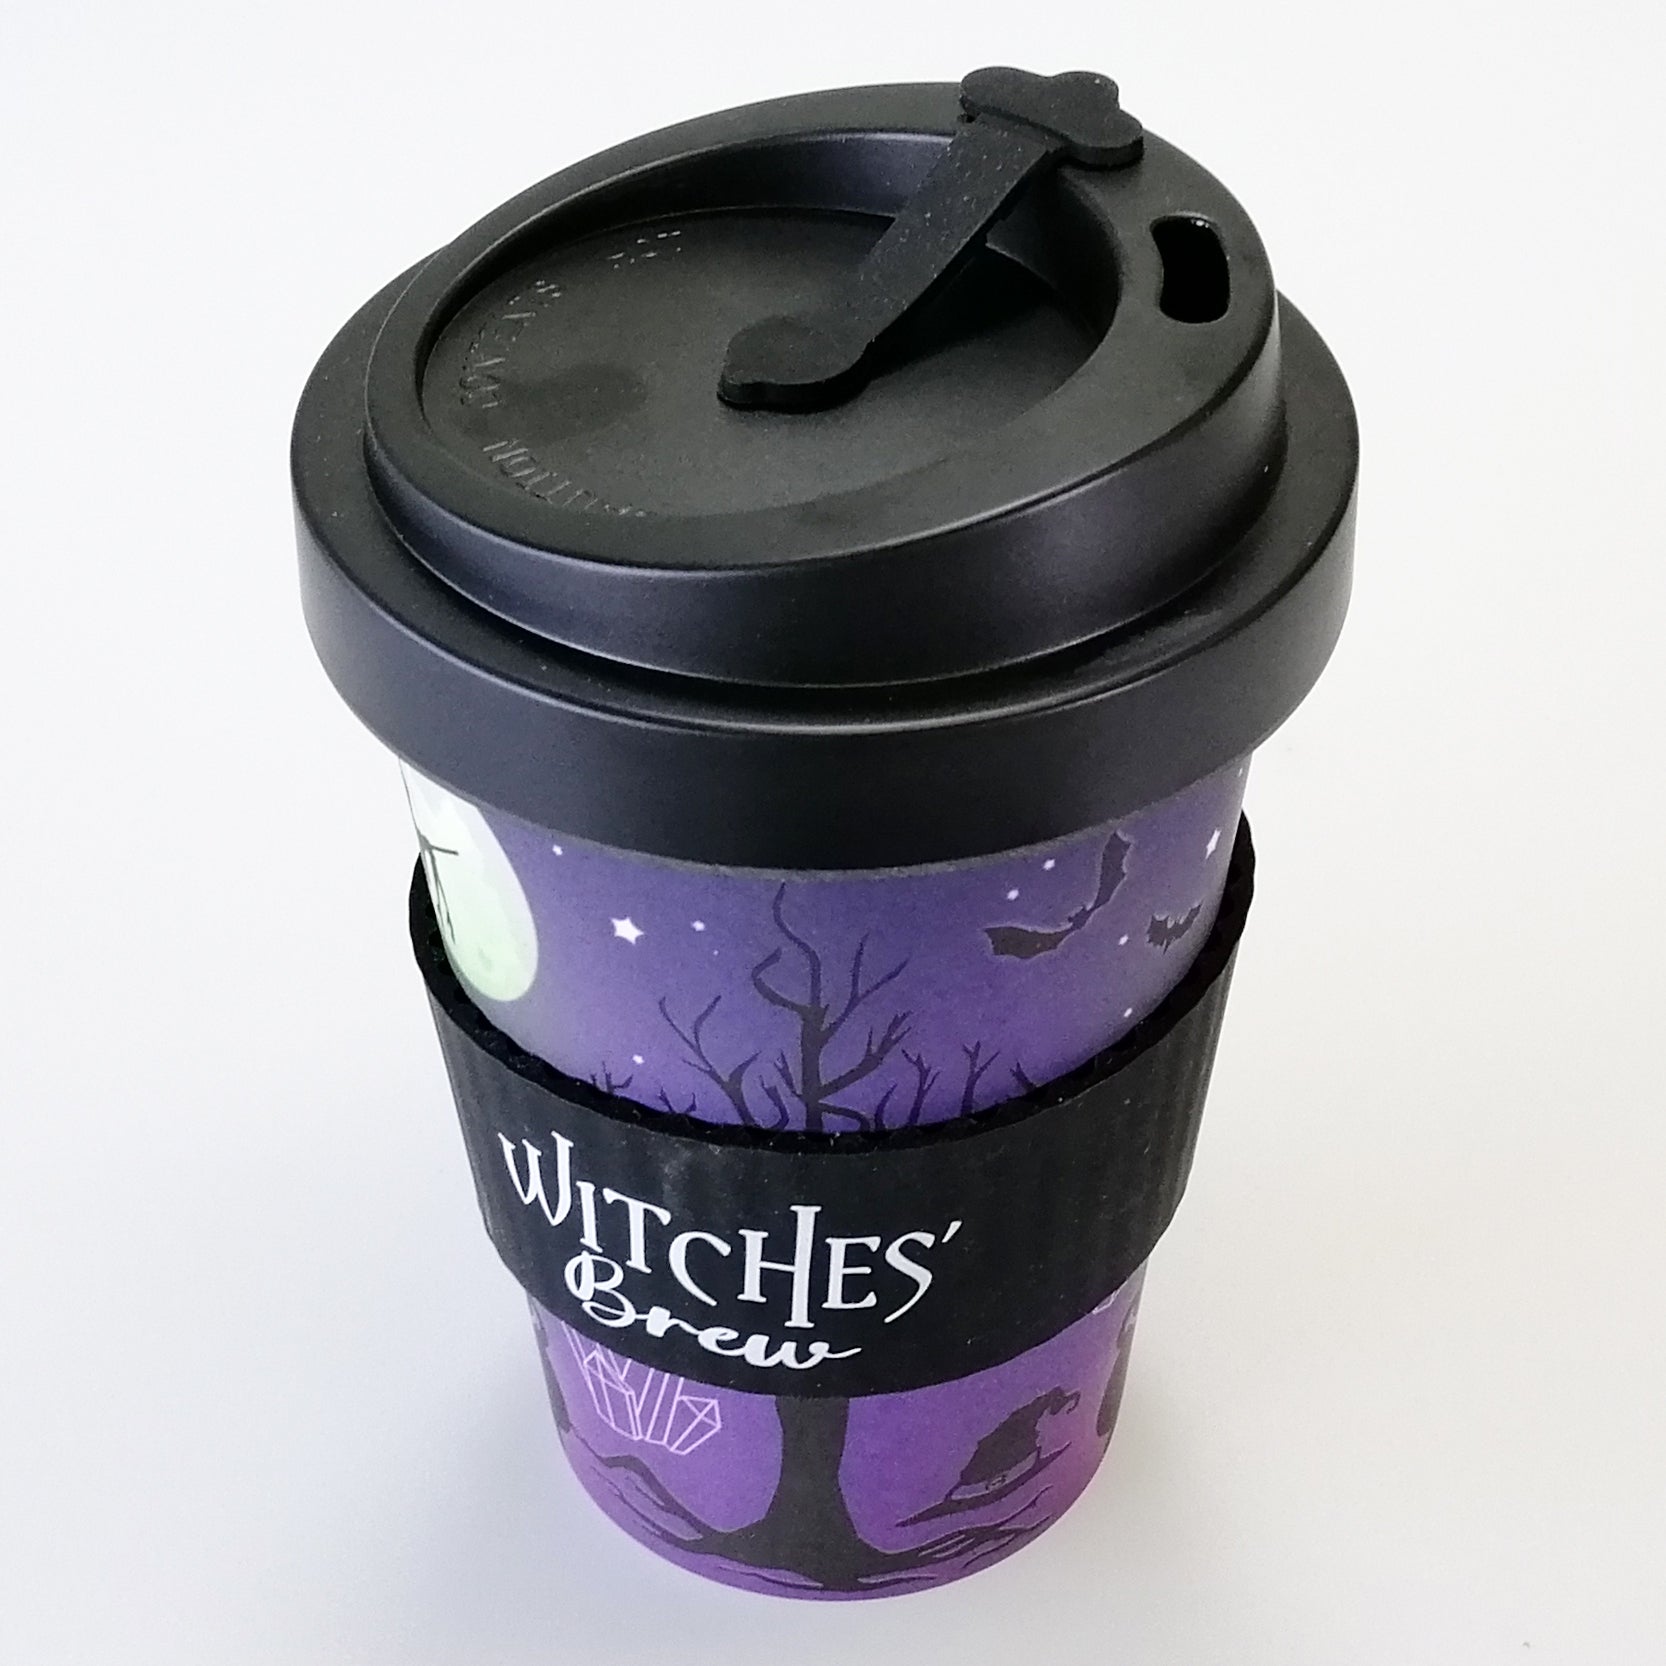 Eco-to-Go Bamboo Cup - 'Witches' Brew' - 470ml